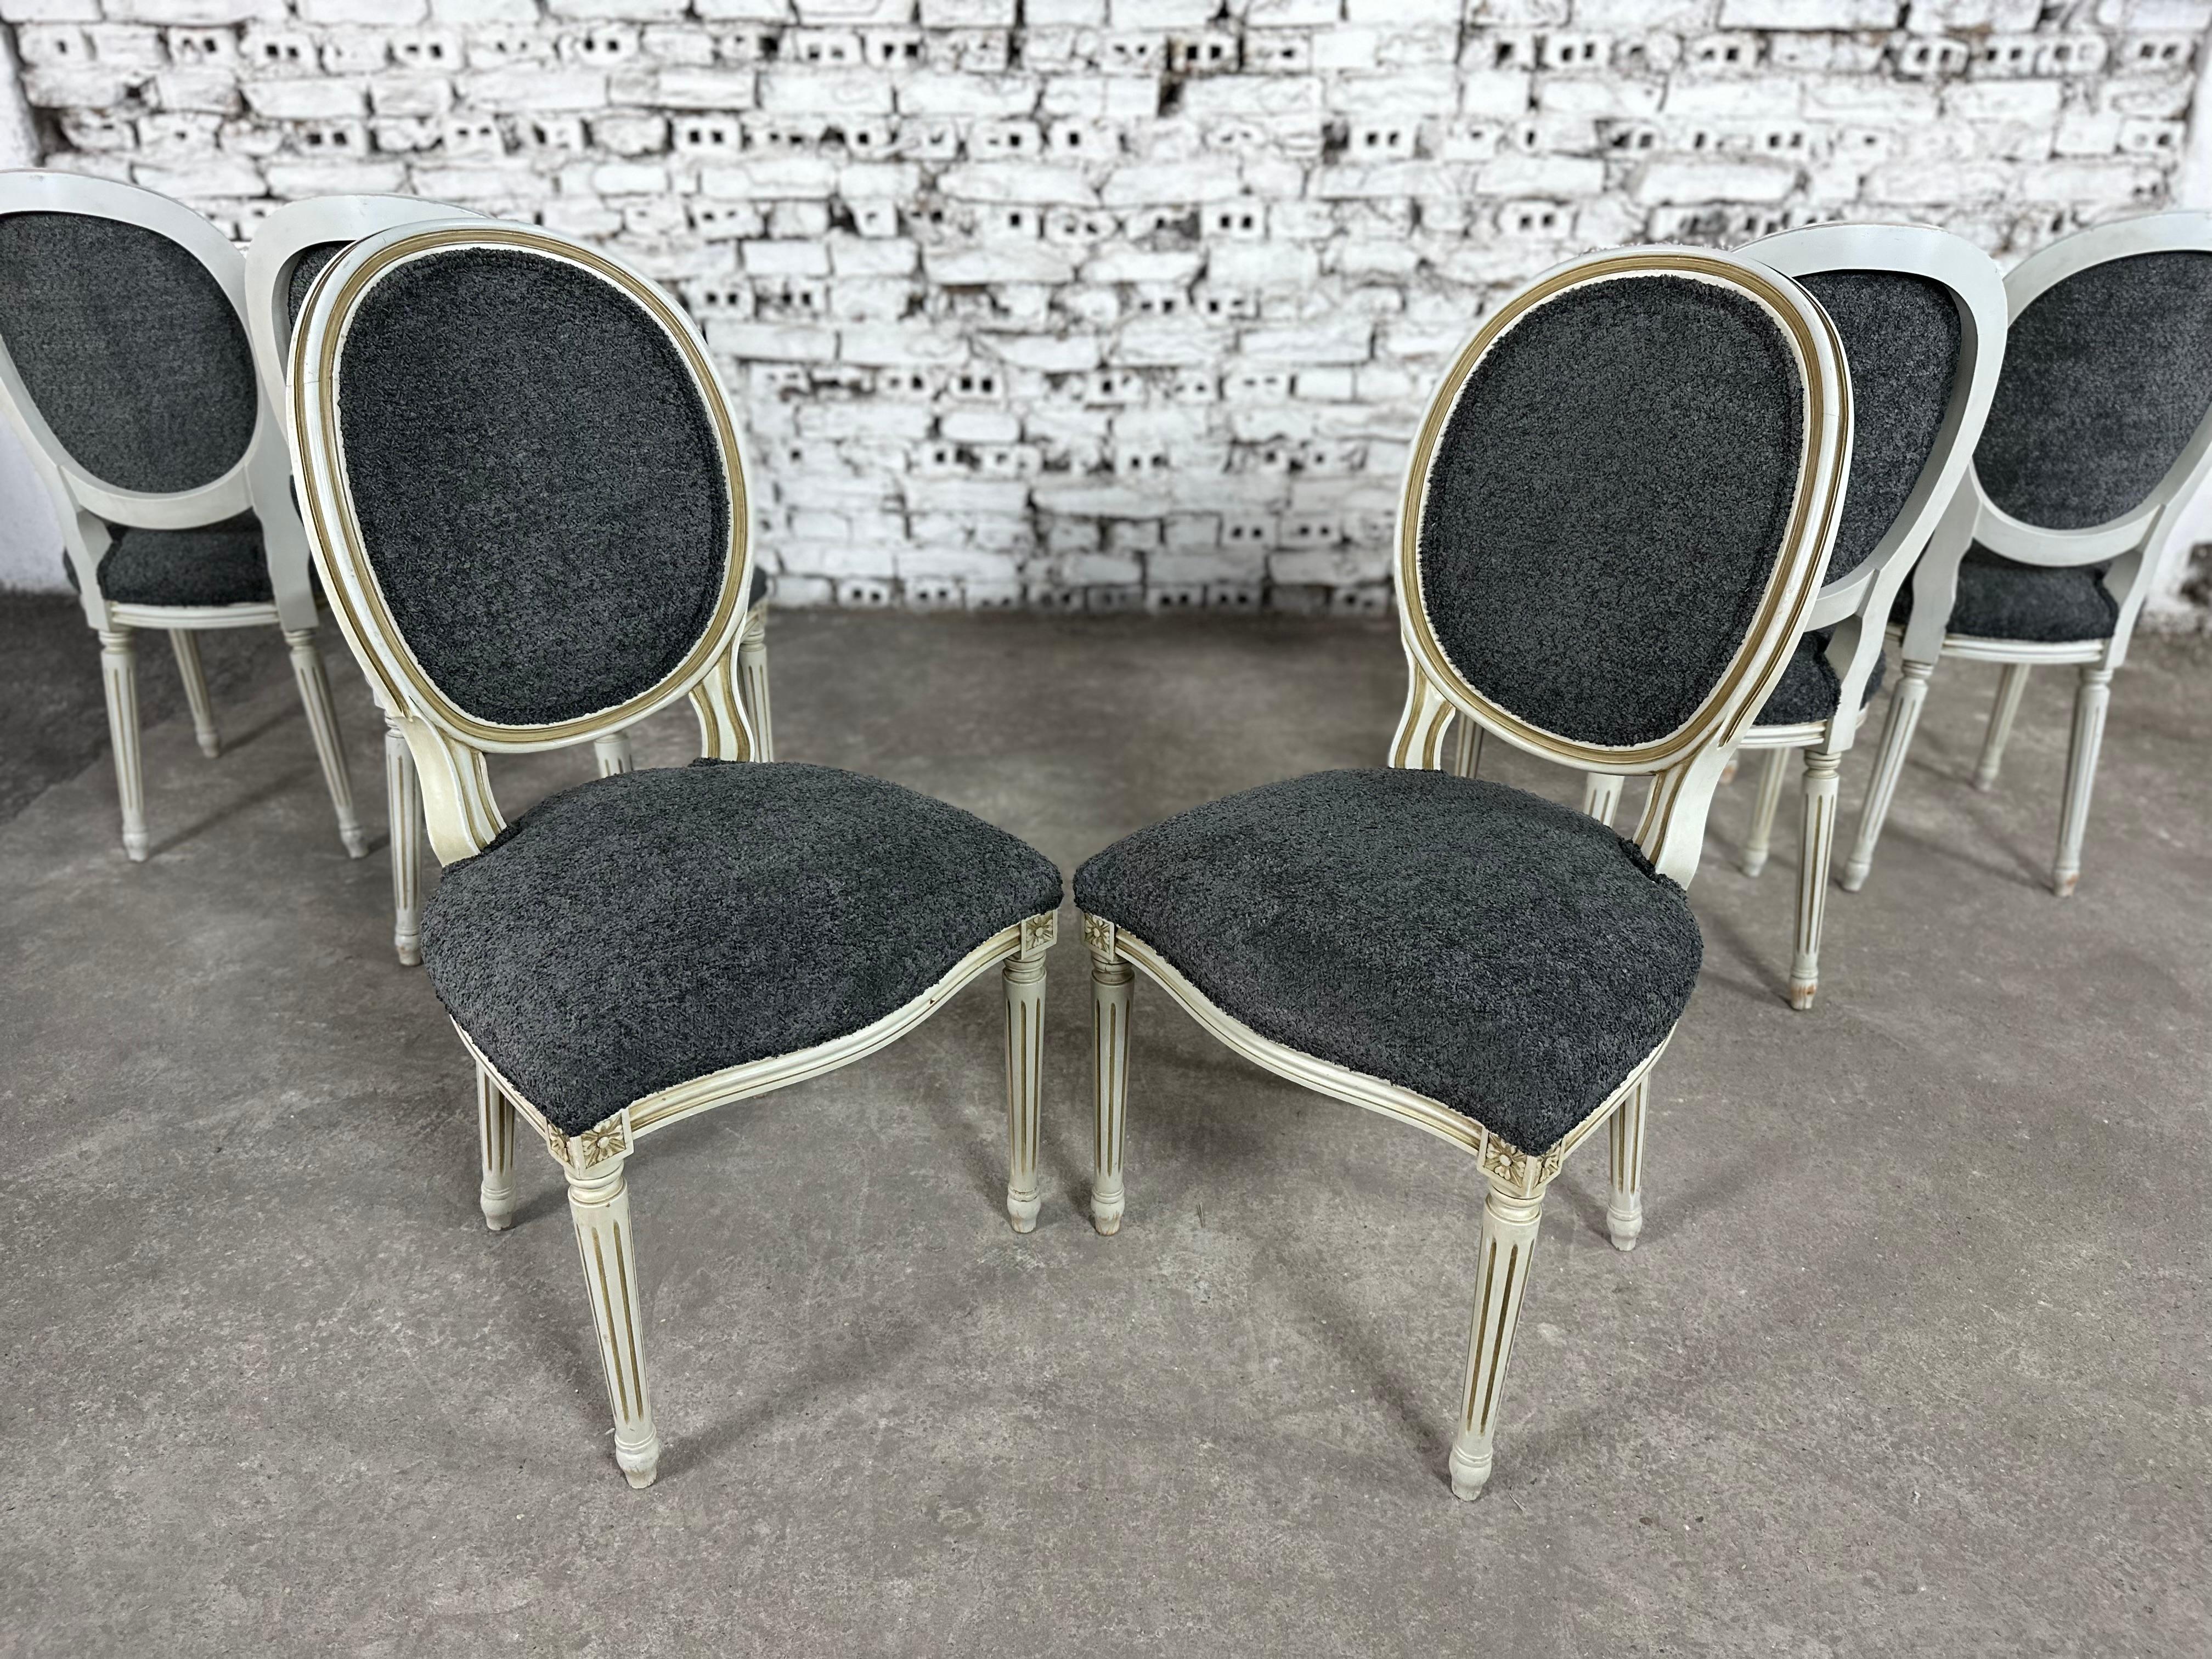 French Louis XVI Medallion Back Dining Chairs, Reupholstered - Set of 6 For Sale 1